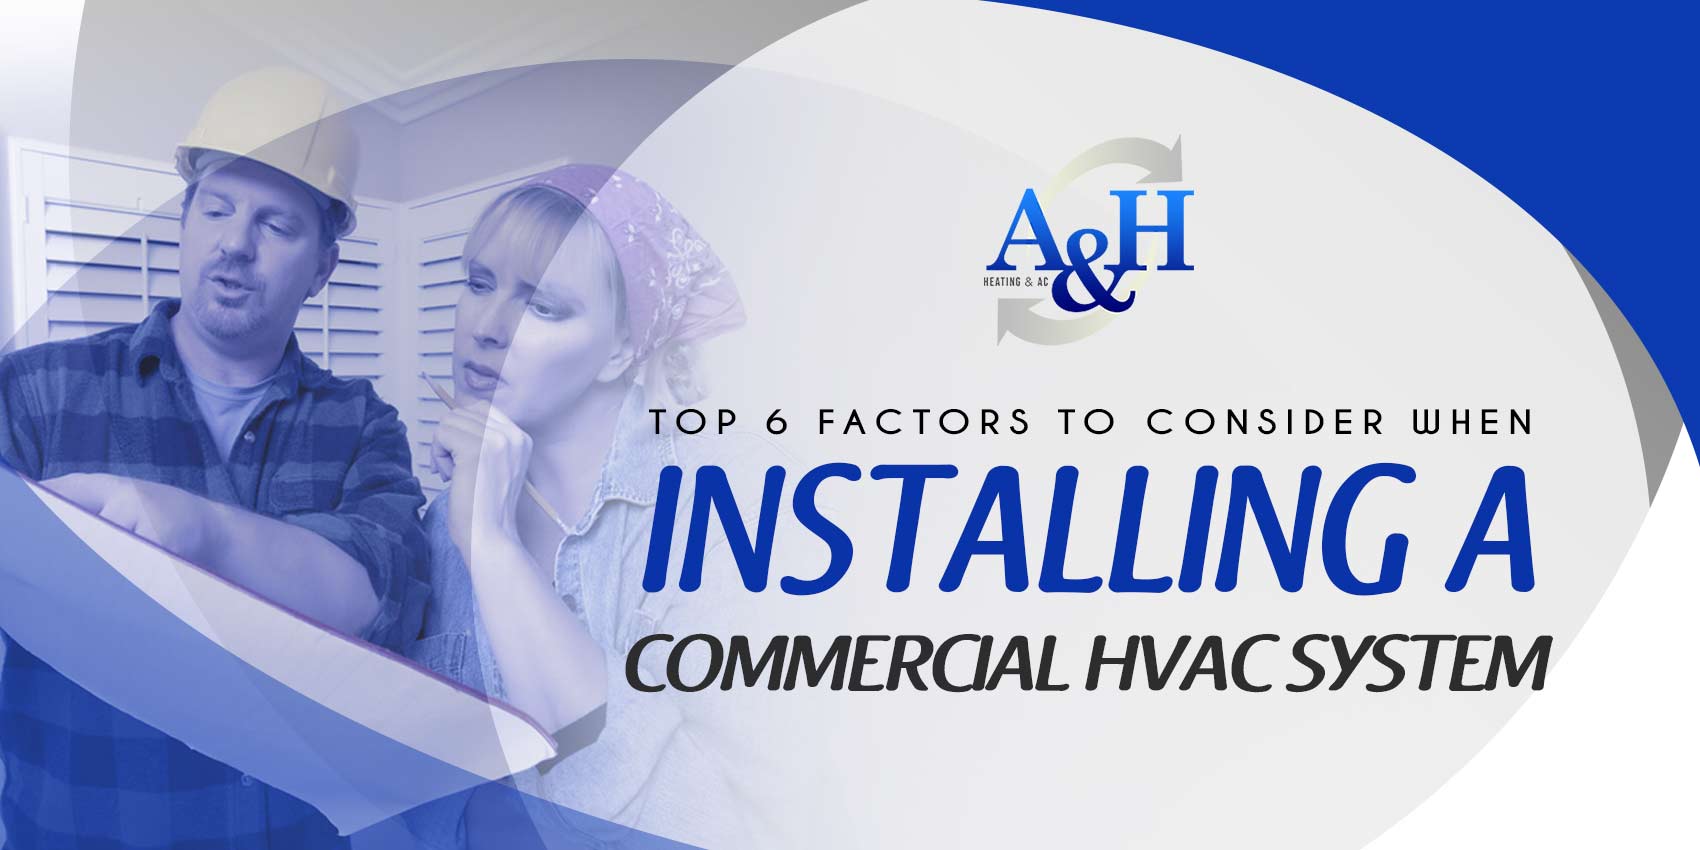 Top 6 Factors to Consider When Installing a Commercial HVAC System